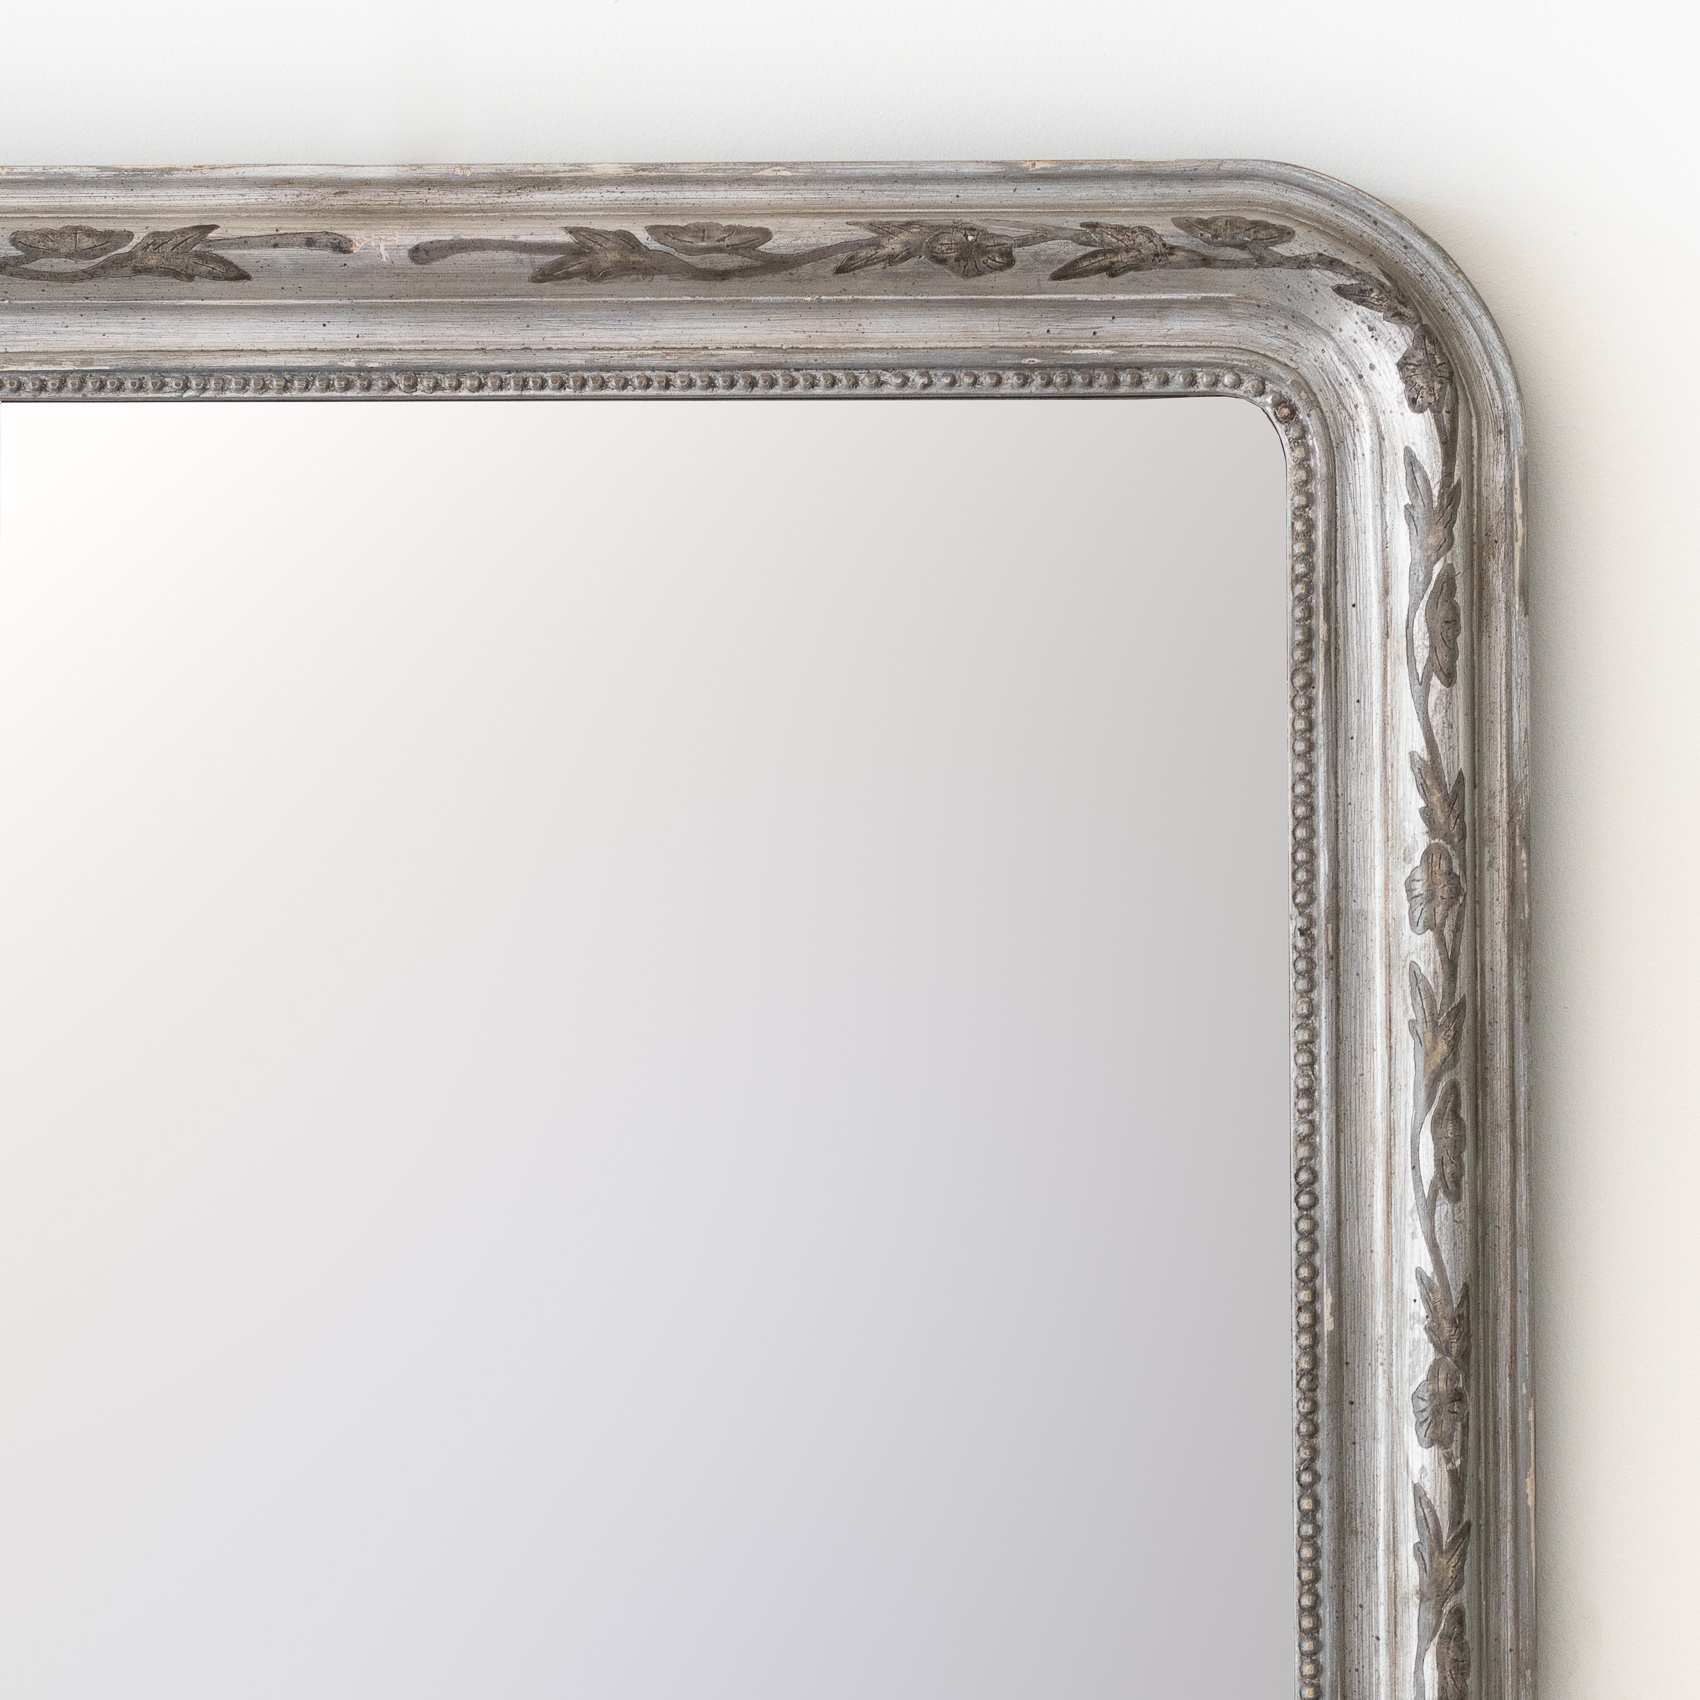 Shop Acme Louis Philippe lll Mirror in Gray 25504